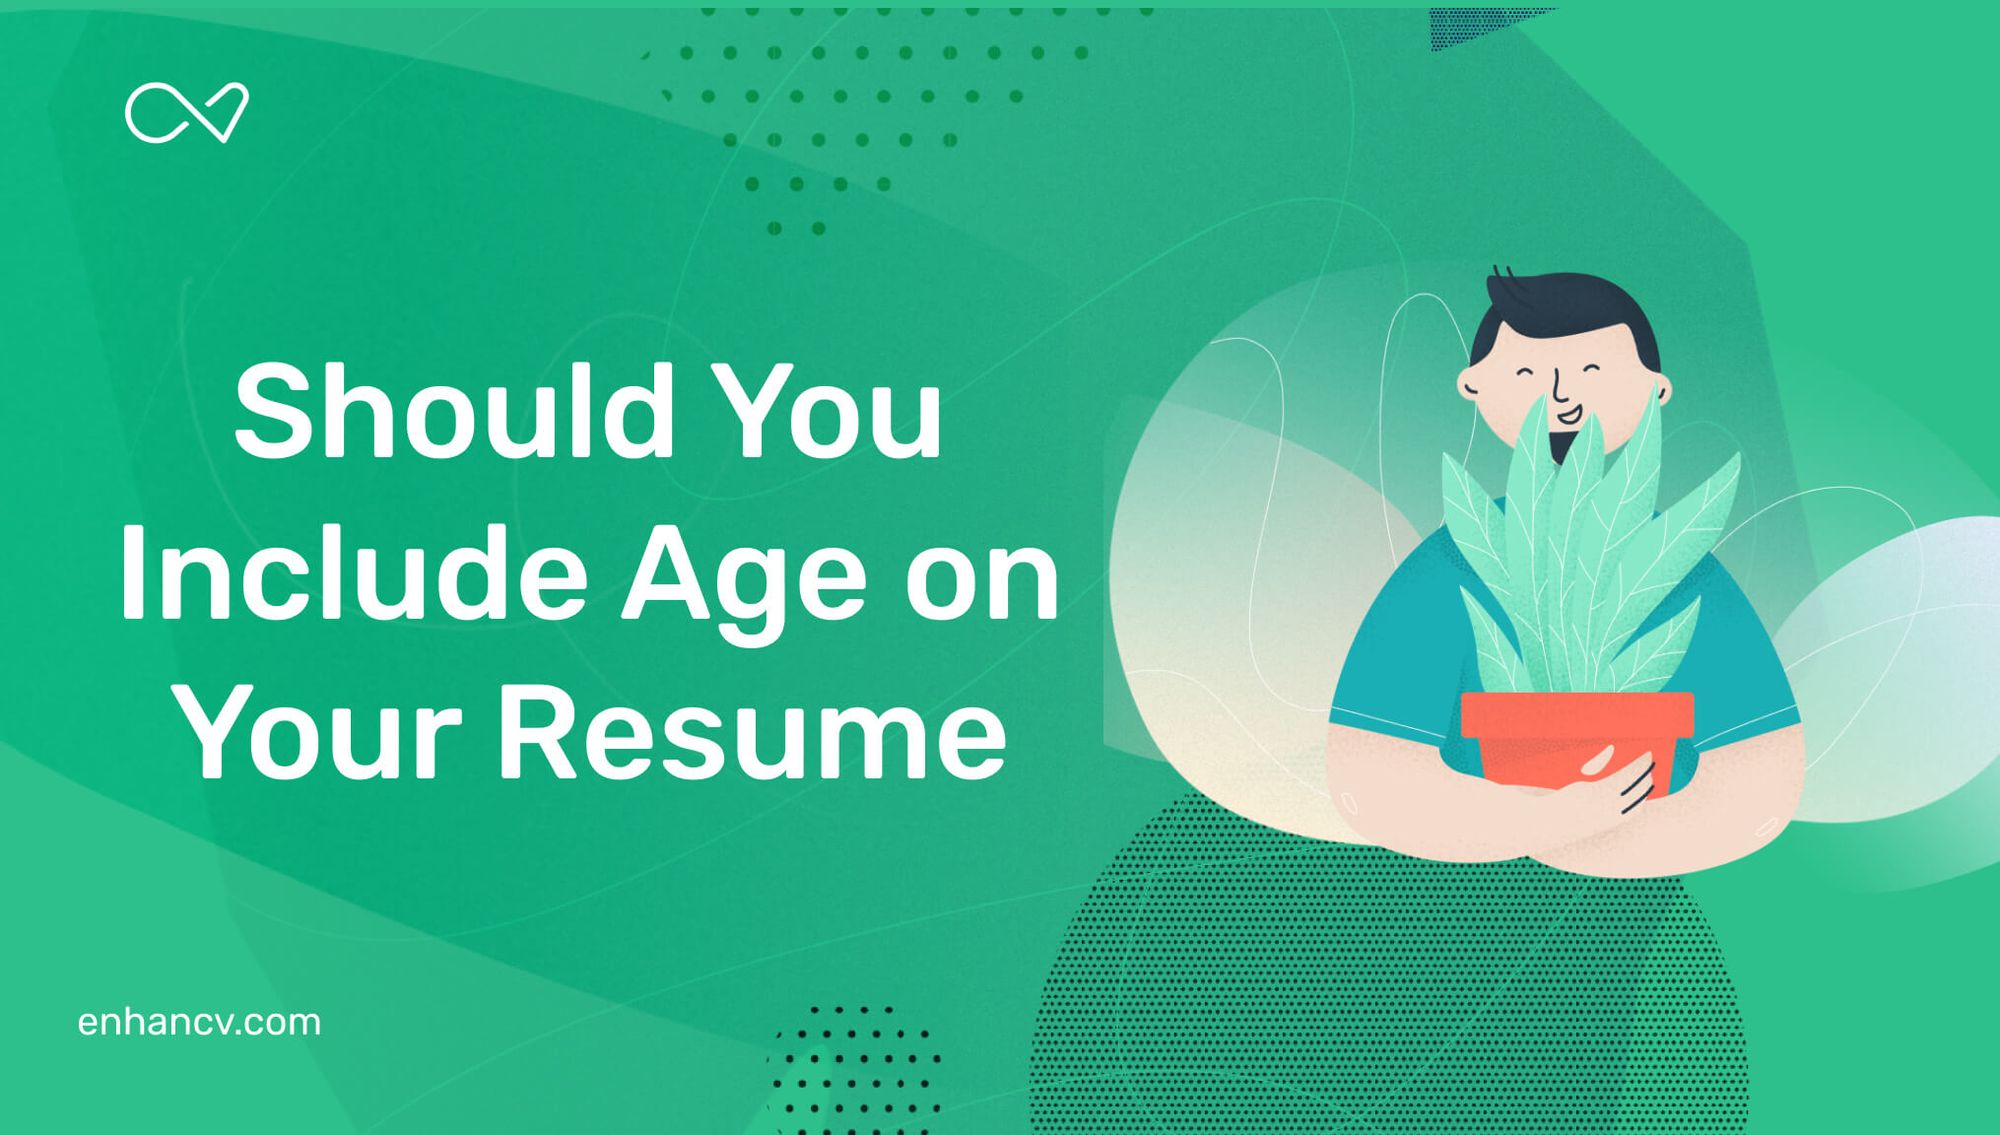 Should You Include Your Age on Your Resume